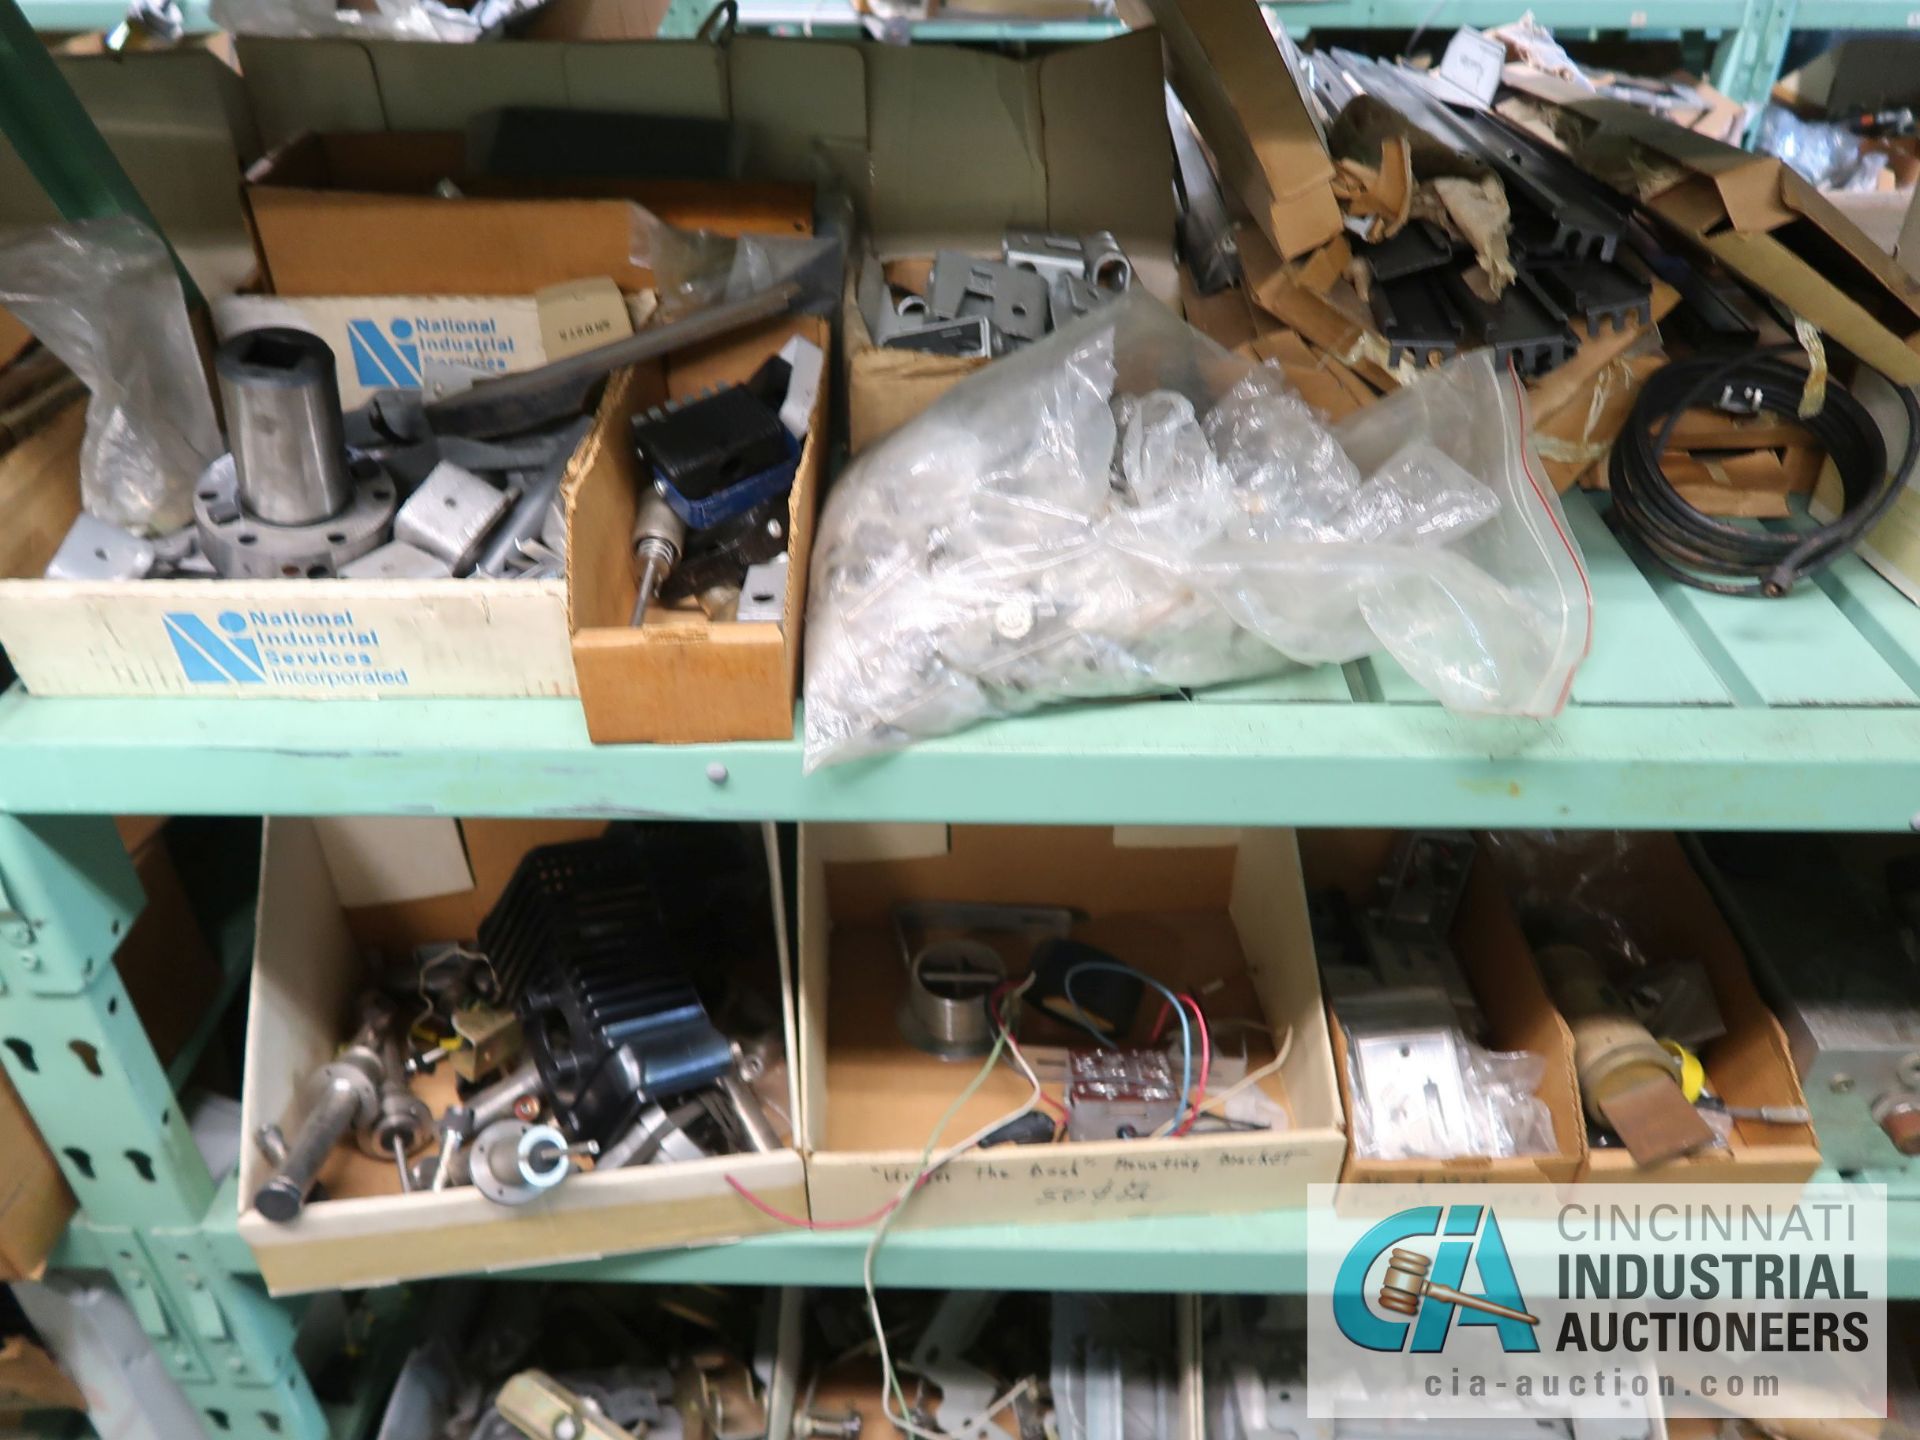 CONTENTS OF (6) RACKS INCLUDING MISCELLANEOUS AUTOMOTIVE PARTS, BREAKS, ROTORS, GASKETS, MOUNTING - Image 32 of 38